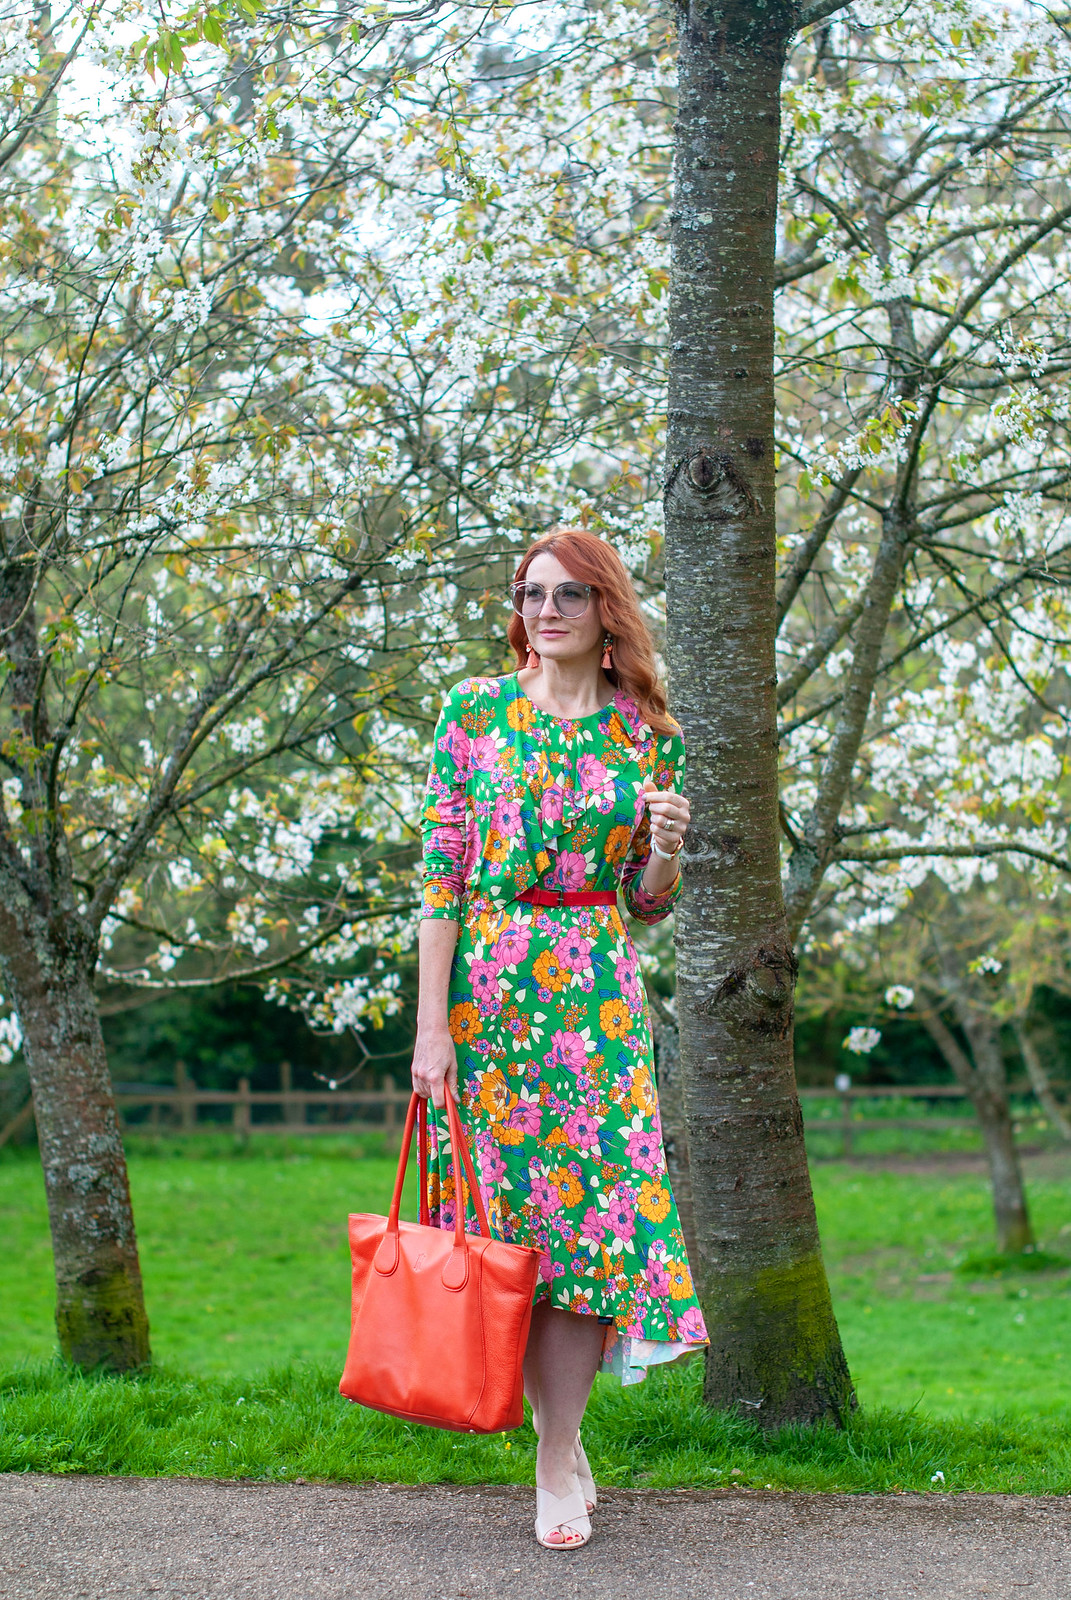 Wearing a Psychedelic Florals for Spring Dress: 60 style floral midi dress with asymmetric hem \ summer style \ bright colours \ outfit of the day \ ootd | Not Dressed As Lamb, over 40 style